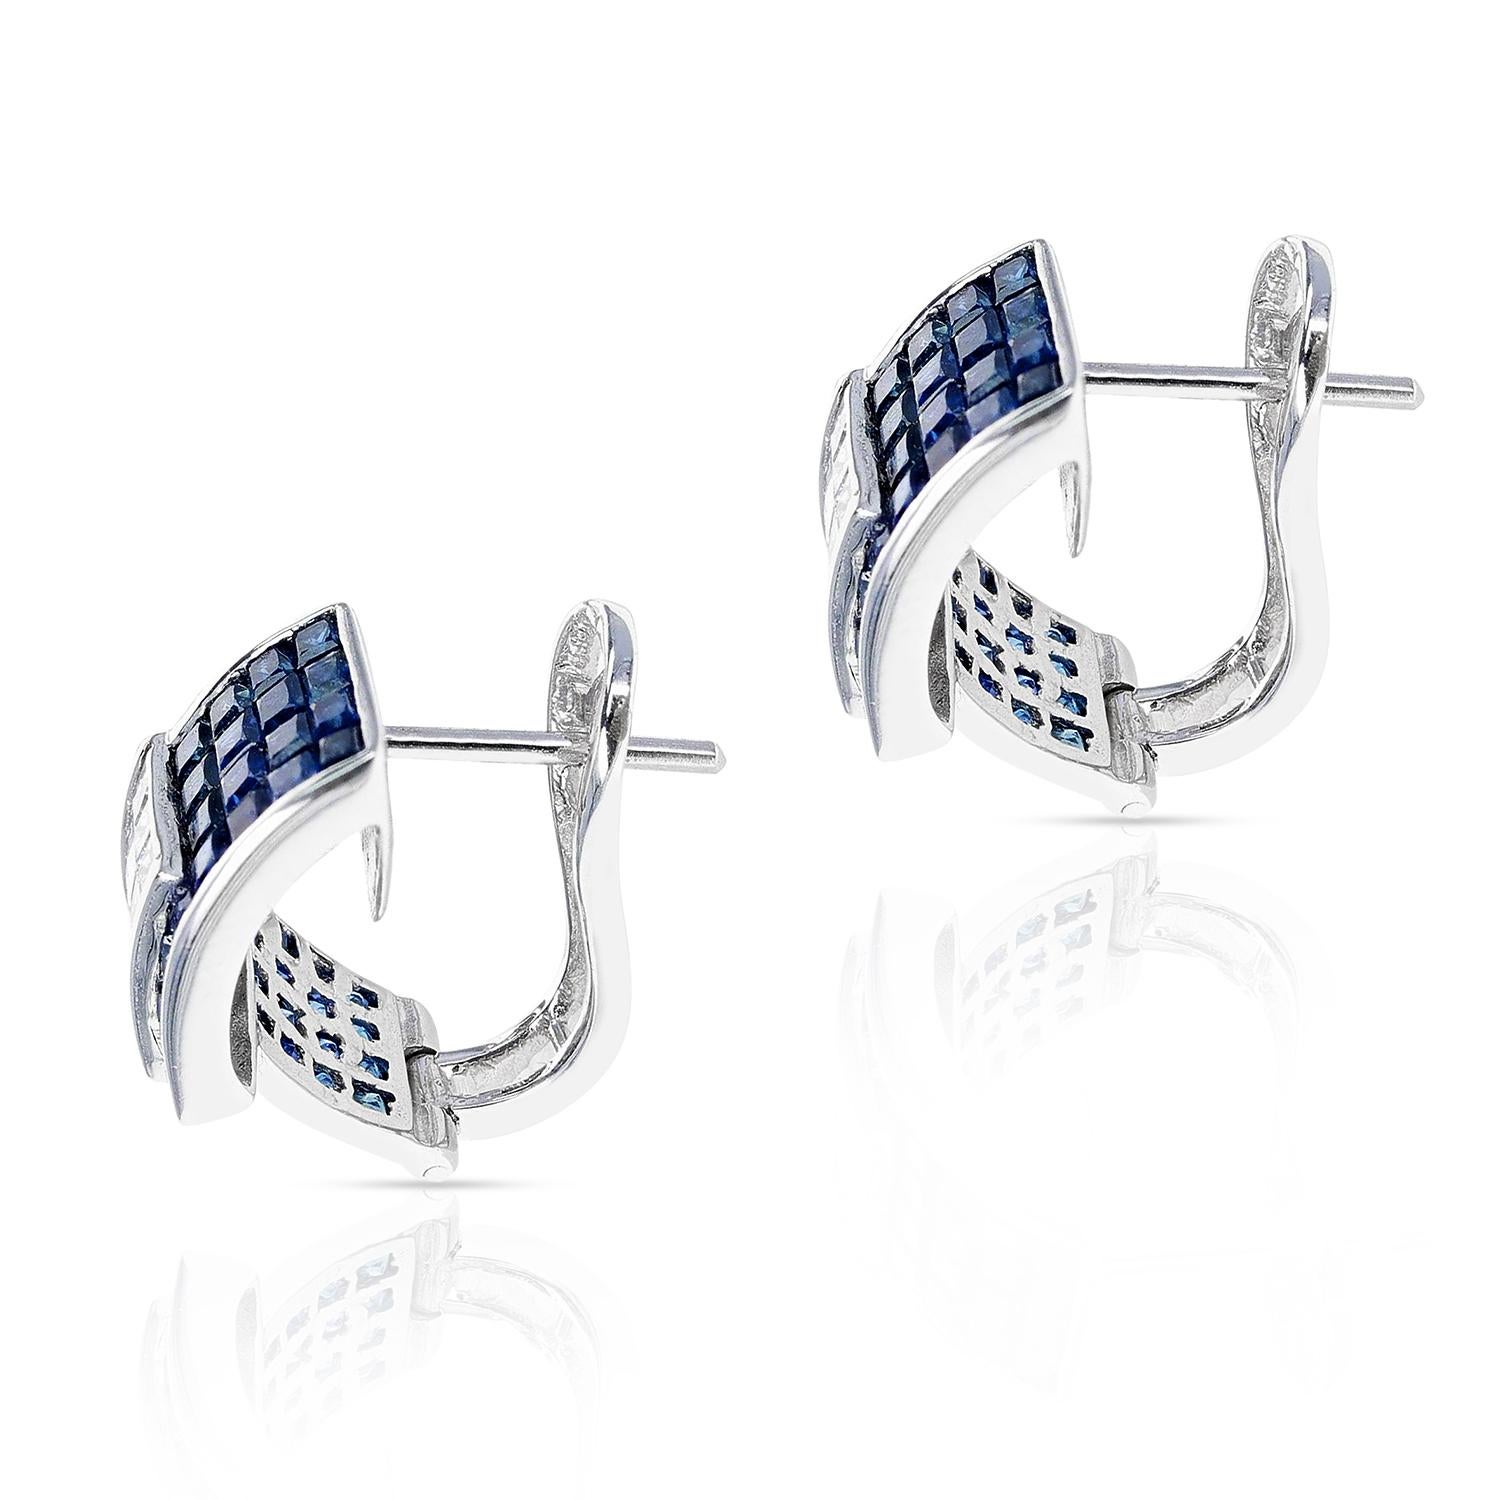 Invisibly Set Sapphire and Diamond Lever Back Earrings, 18K White Gold In Excellent Condition For Sale In New York, NY